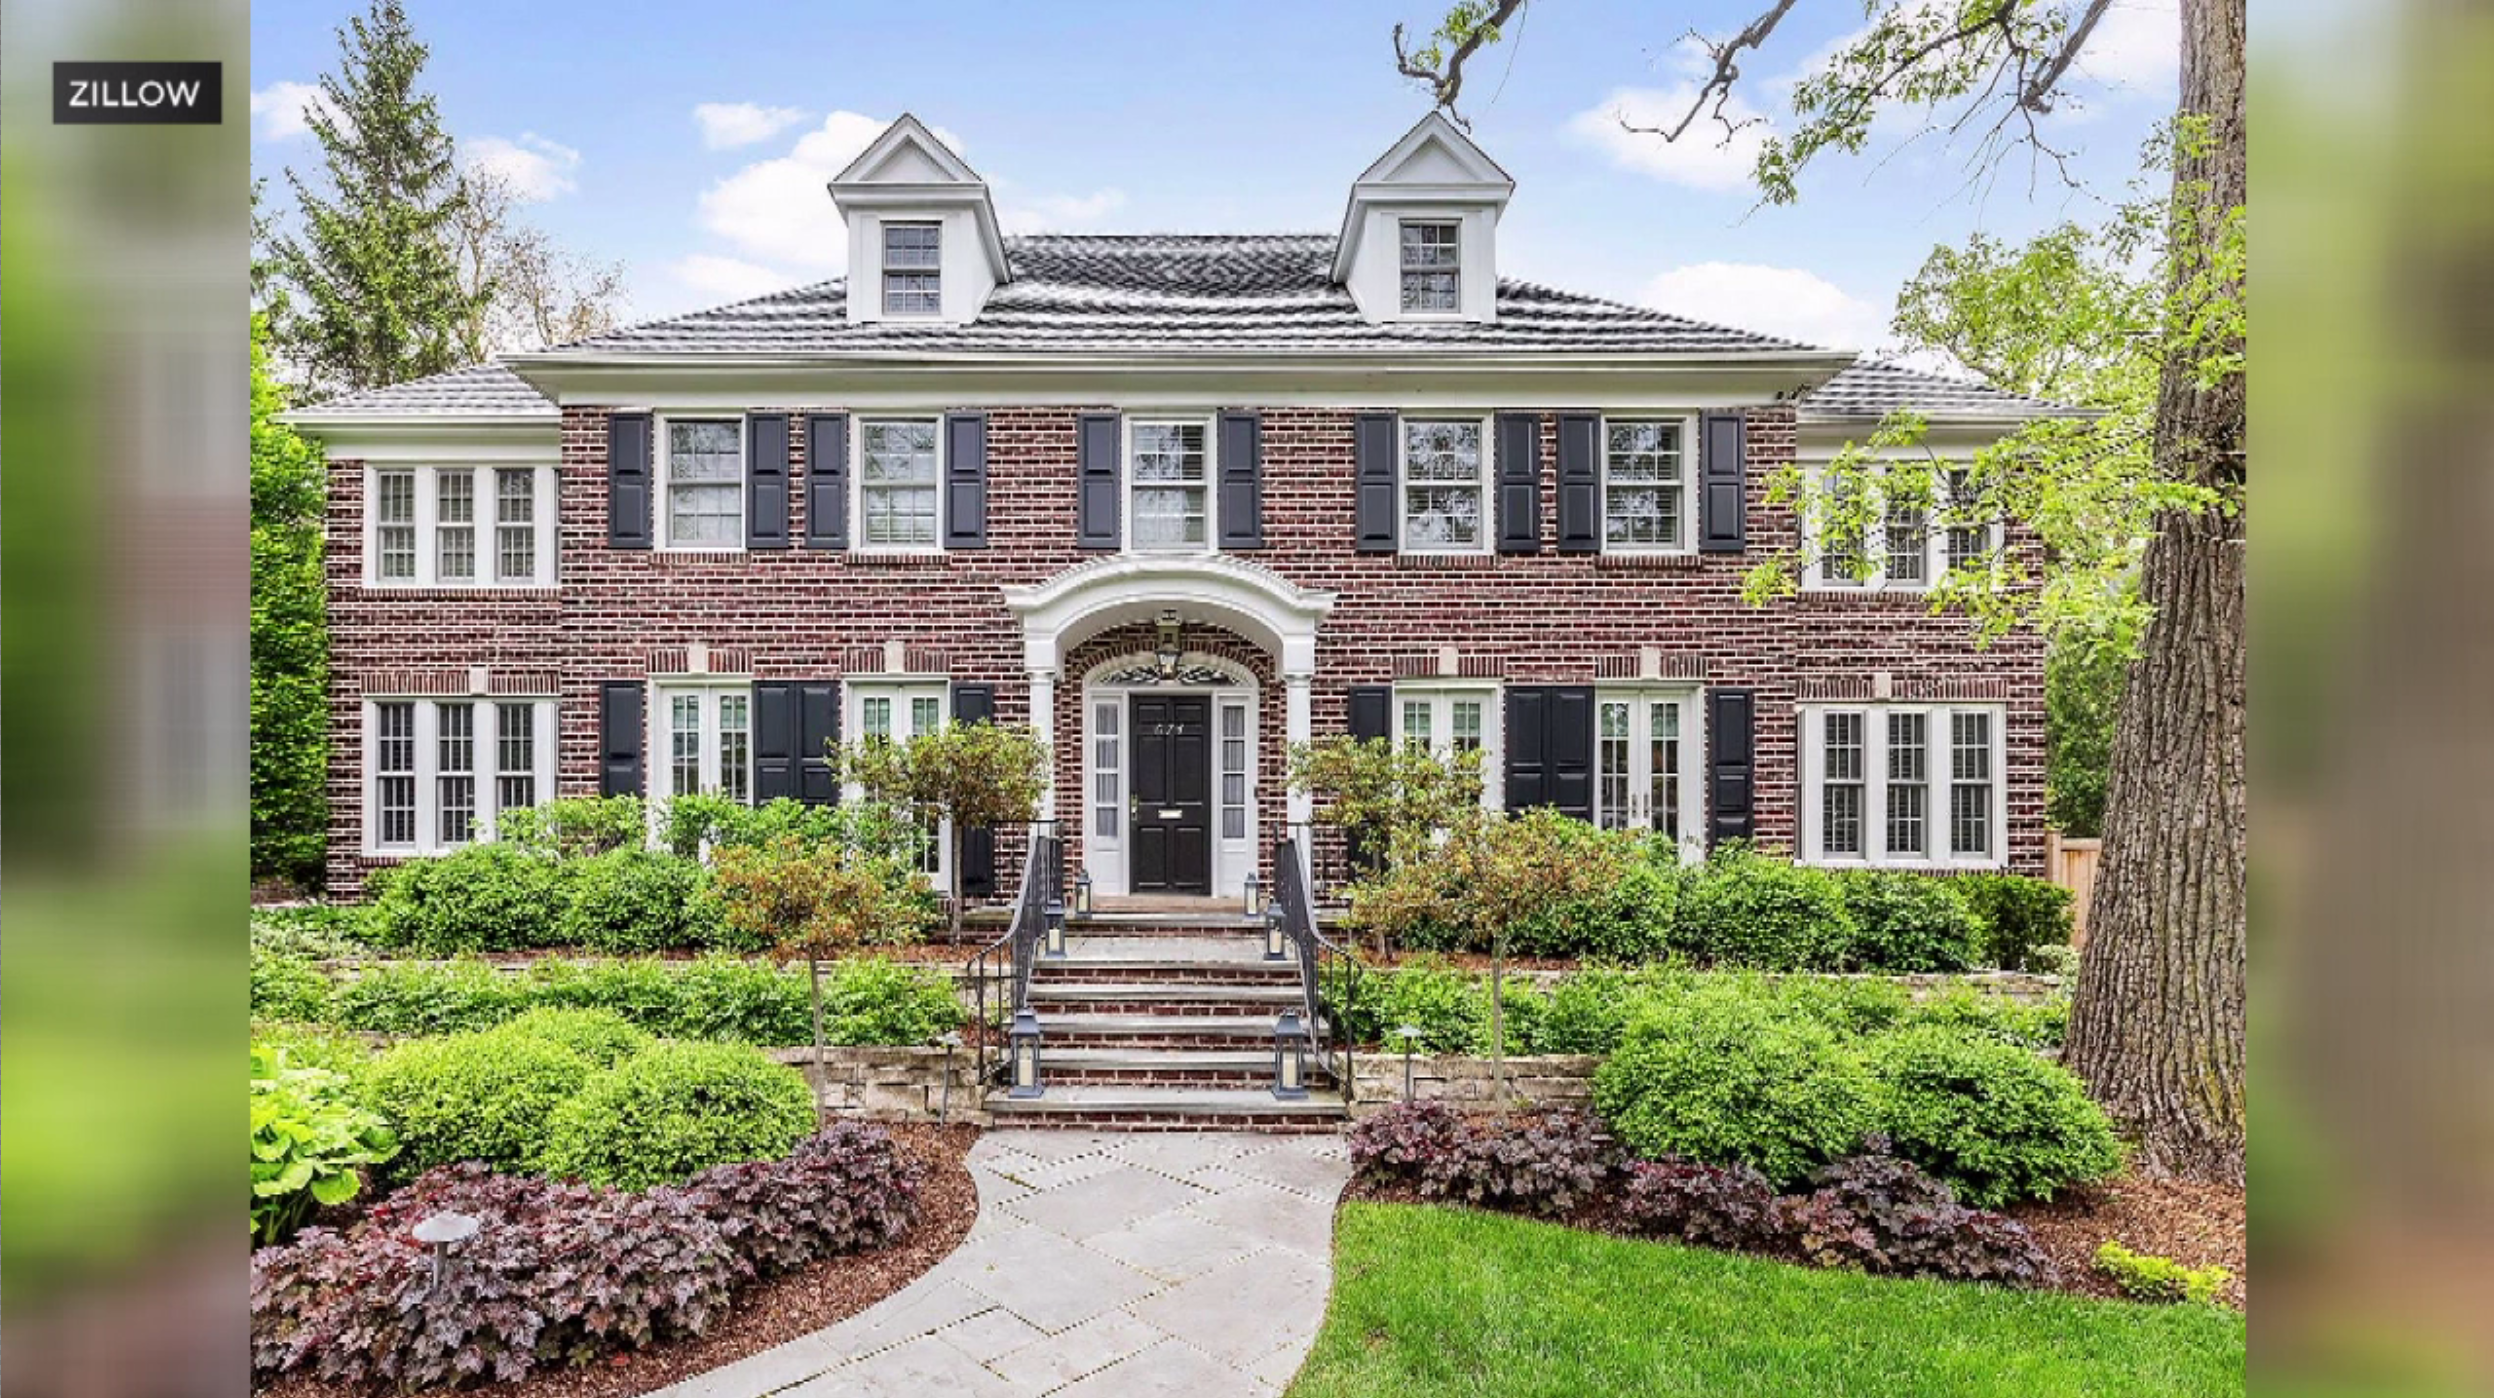 "Home Alone" house under contract after hitting the market a week before